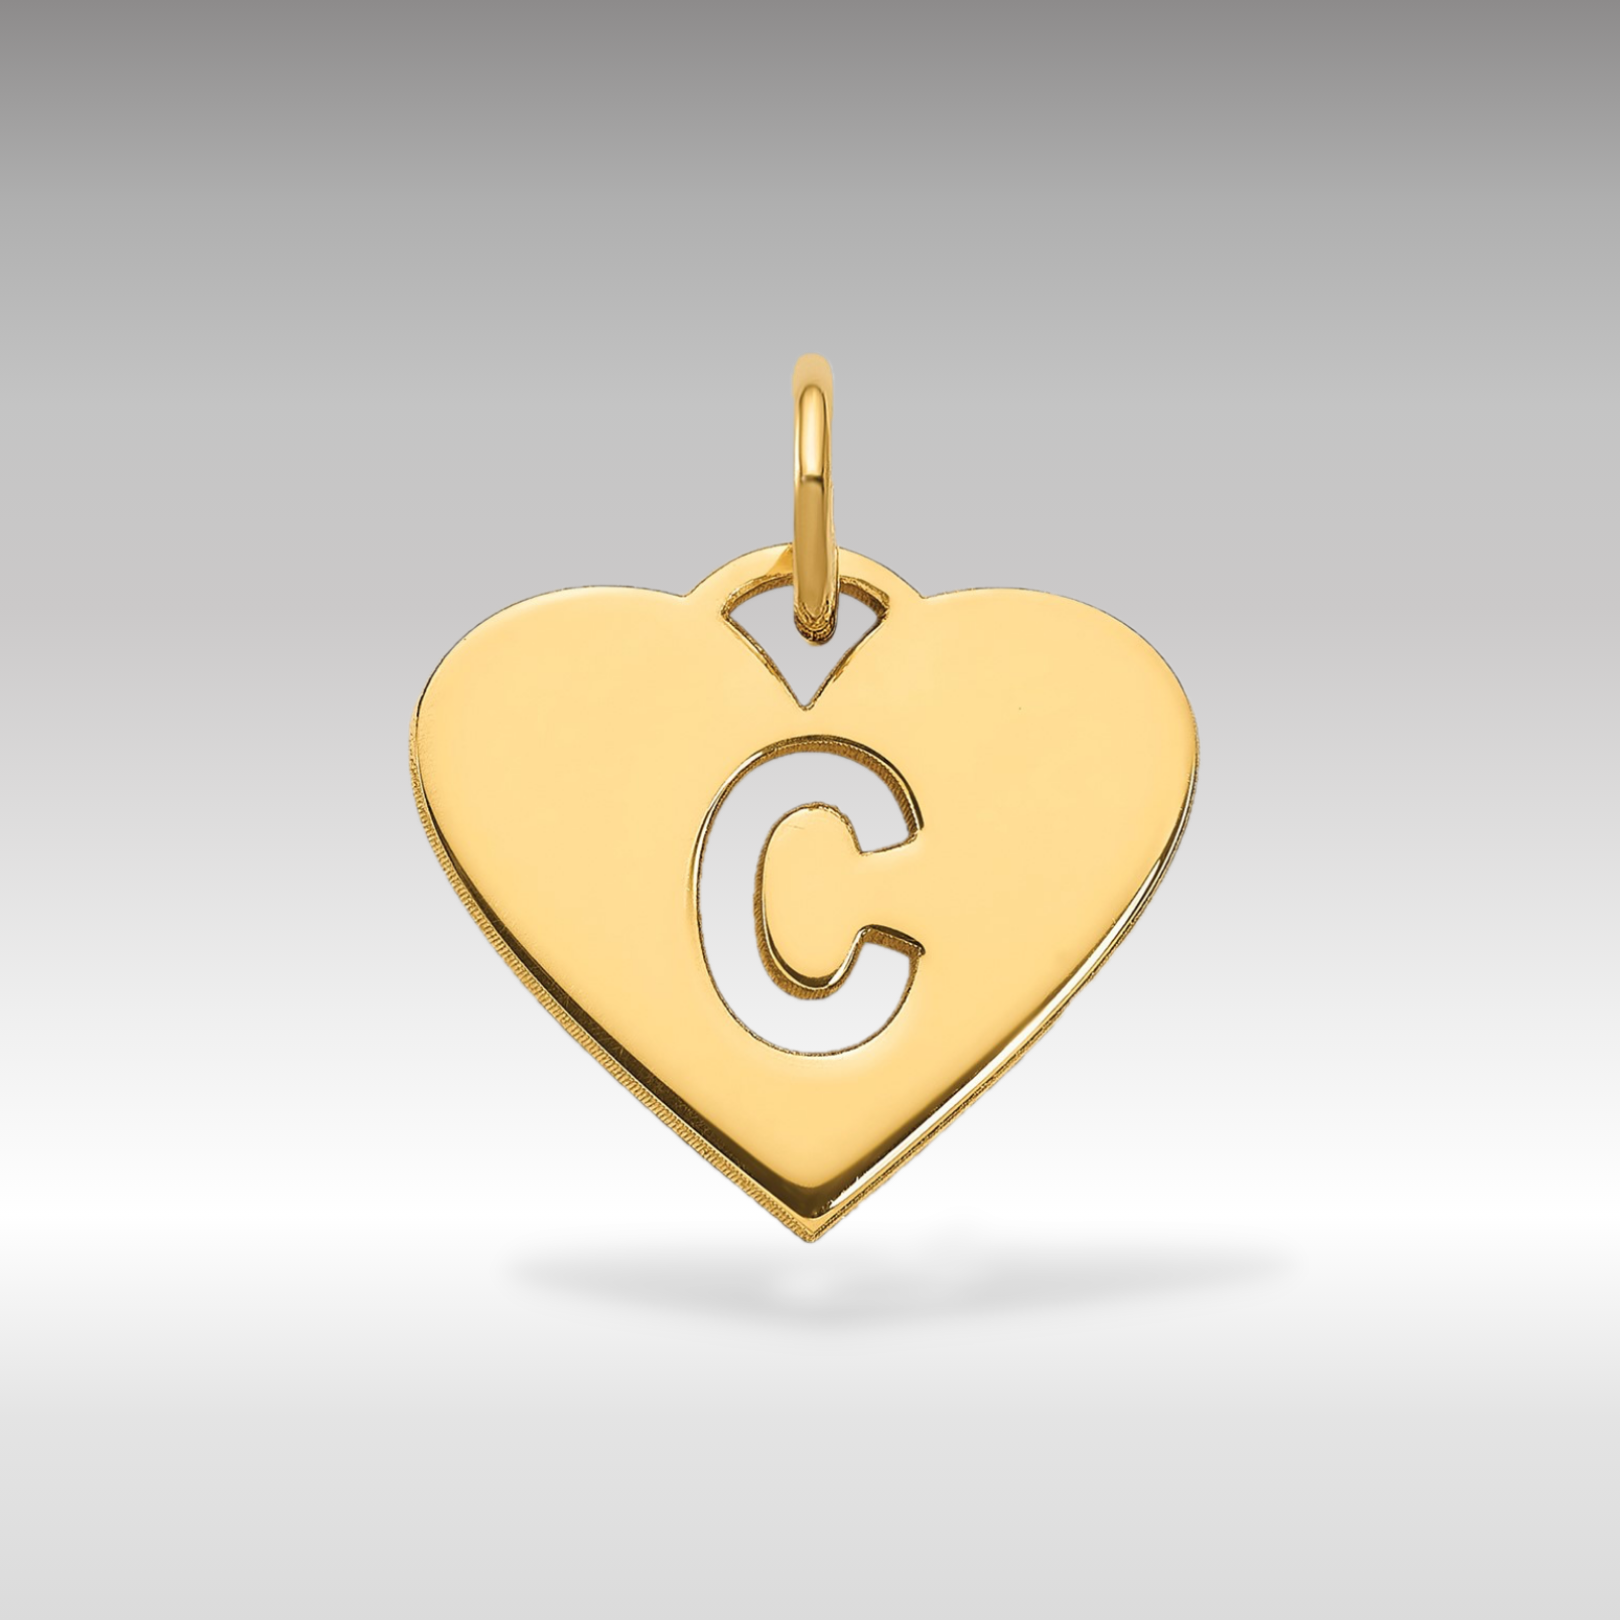 14K Gold Heart Pendant with Letter 'C' - Charlie & Co. Jewelry